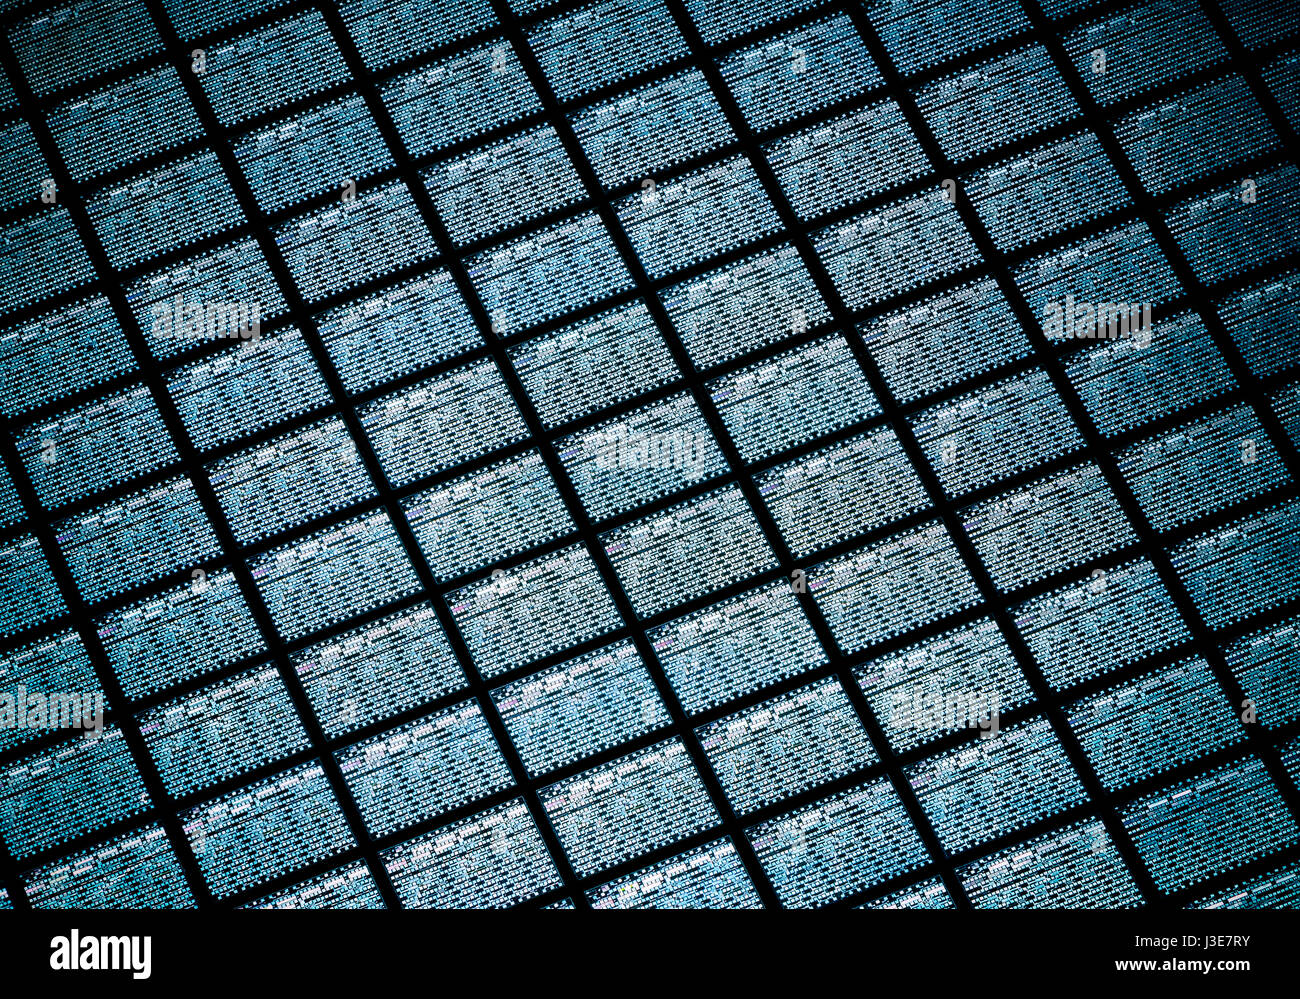 Detail of Silicon Wafer Containing Microchips Stock Photo